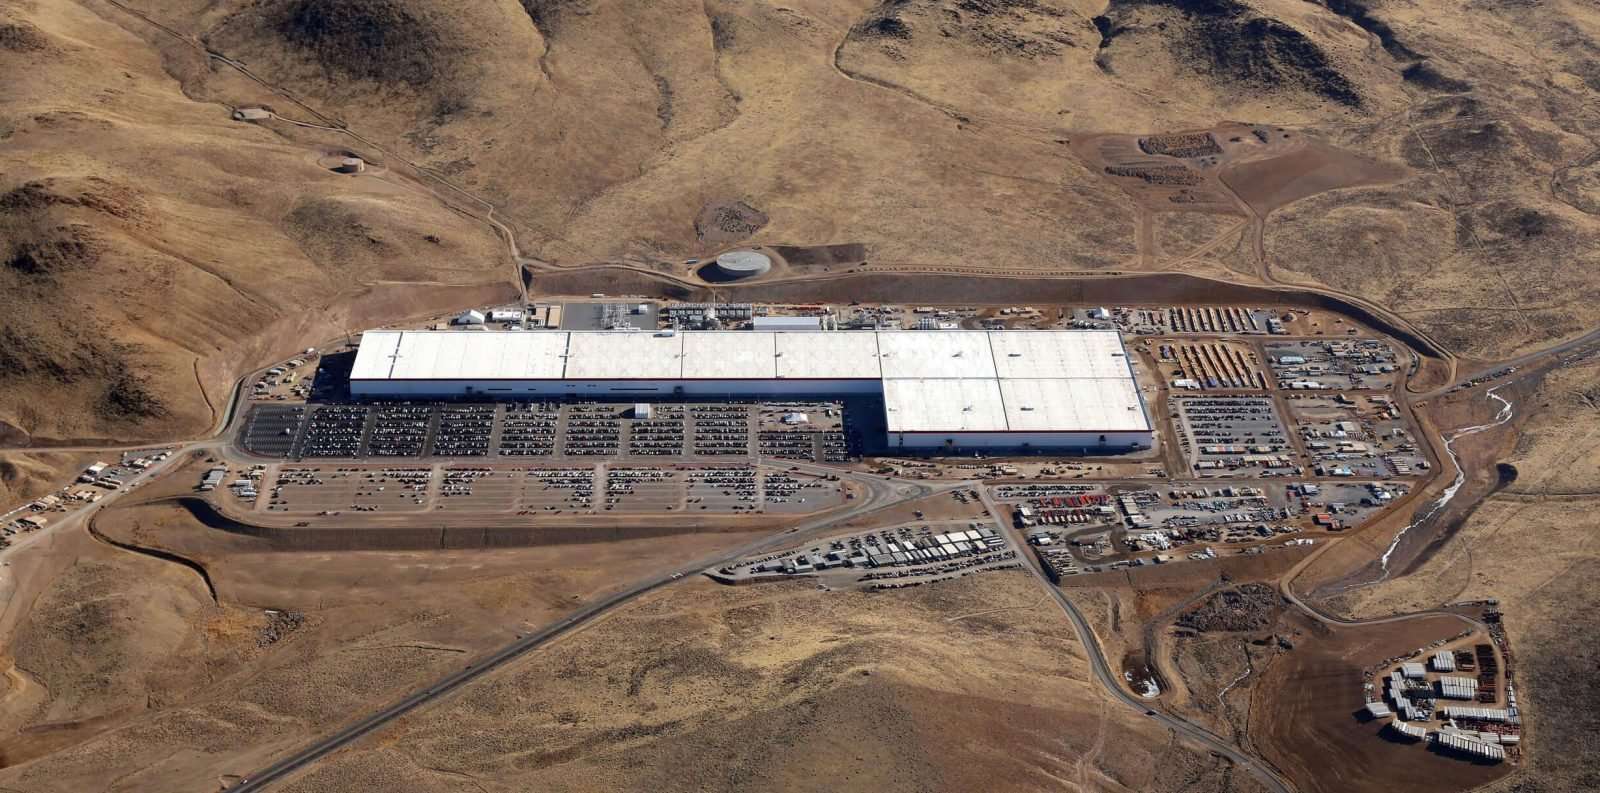 image for Tesla Gigafactory 1 now employs over 3,000 workers as it becomes biggest battery factory in the world